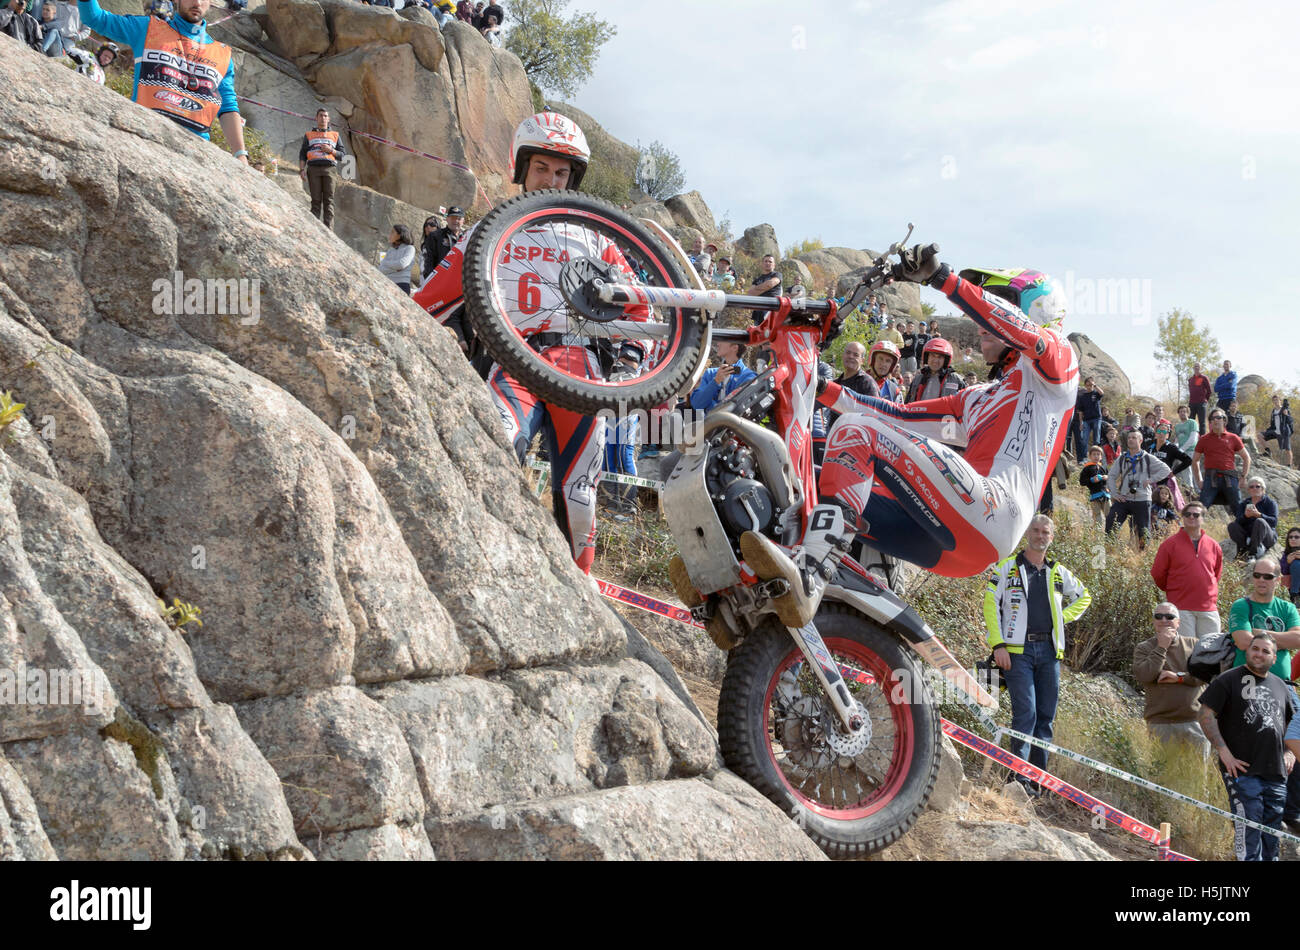 Motorcycling. Trial race. Spain championship. Jorge Casales overtaking an obstacle, in Valdemanco (Madrid - Spain) Stock Photo